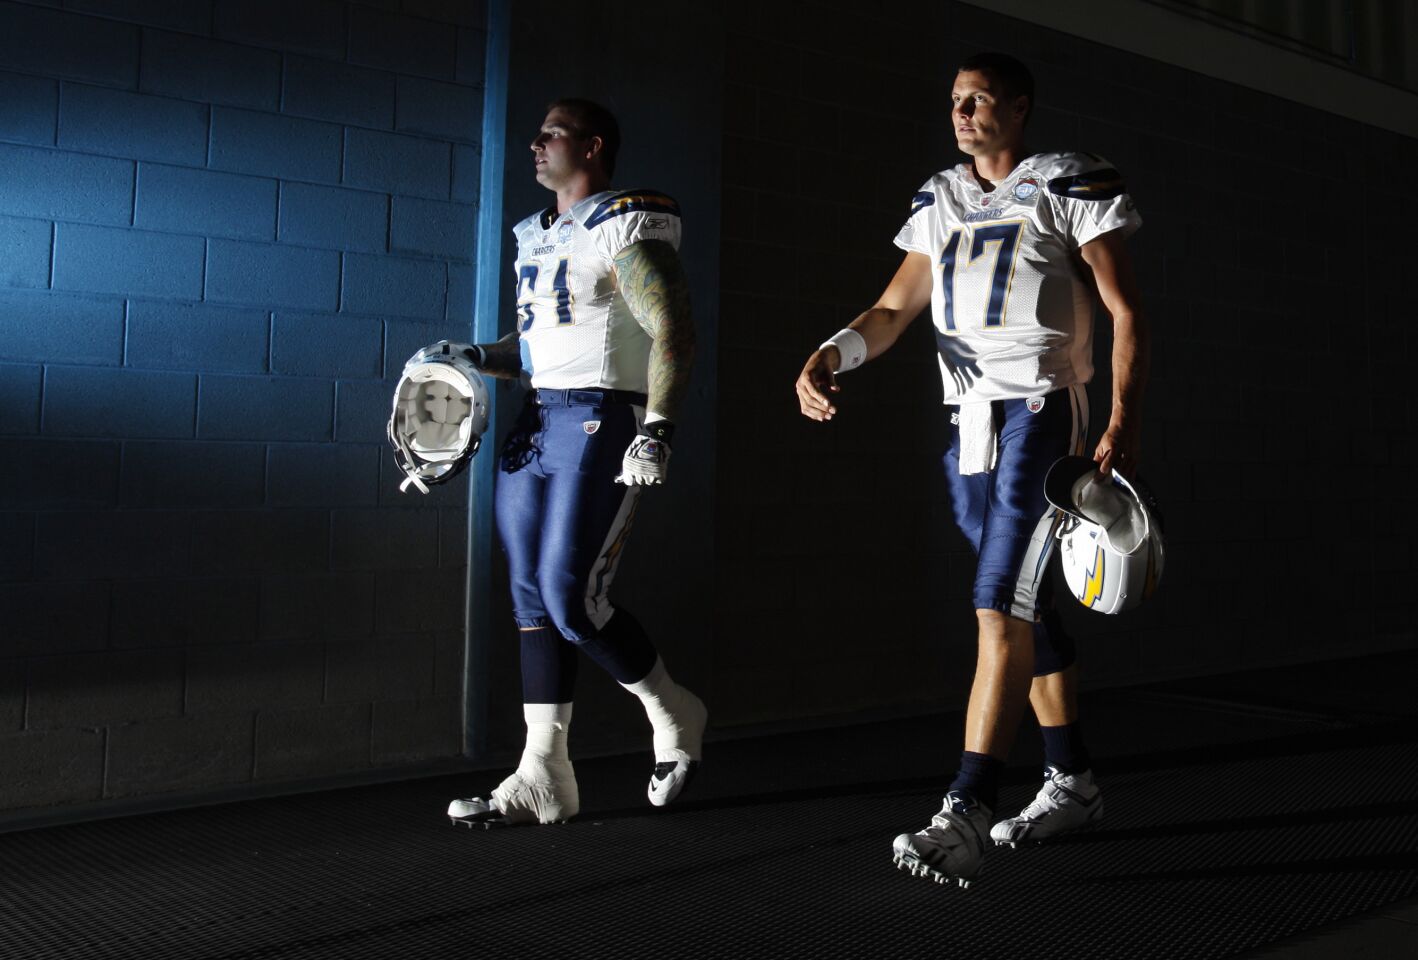 Chargers Nick Hardwick and Philip Rivers walk to the field against the Cardinals in Glendale on Aug. 20, 2009.